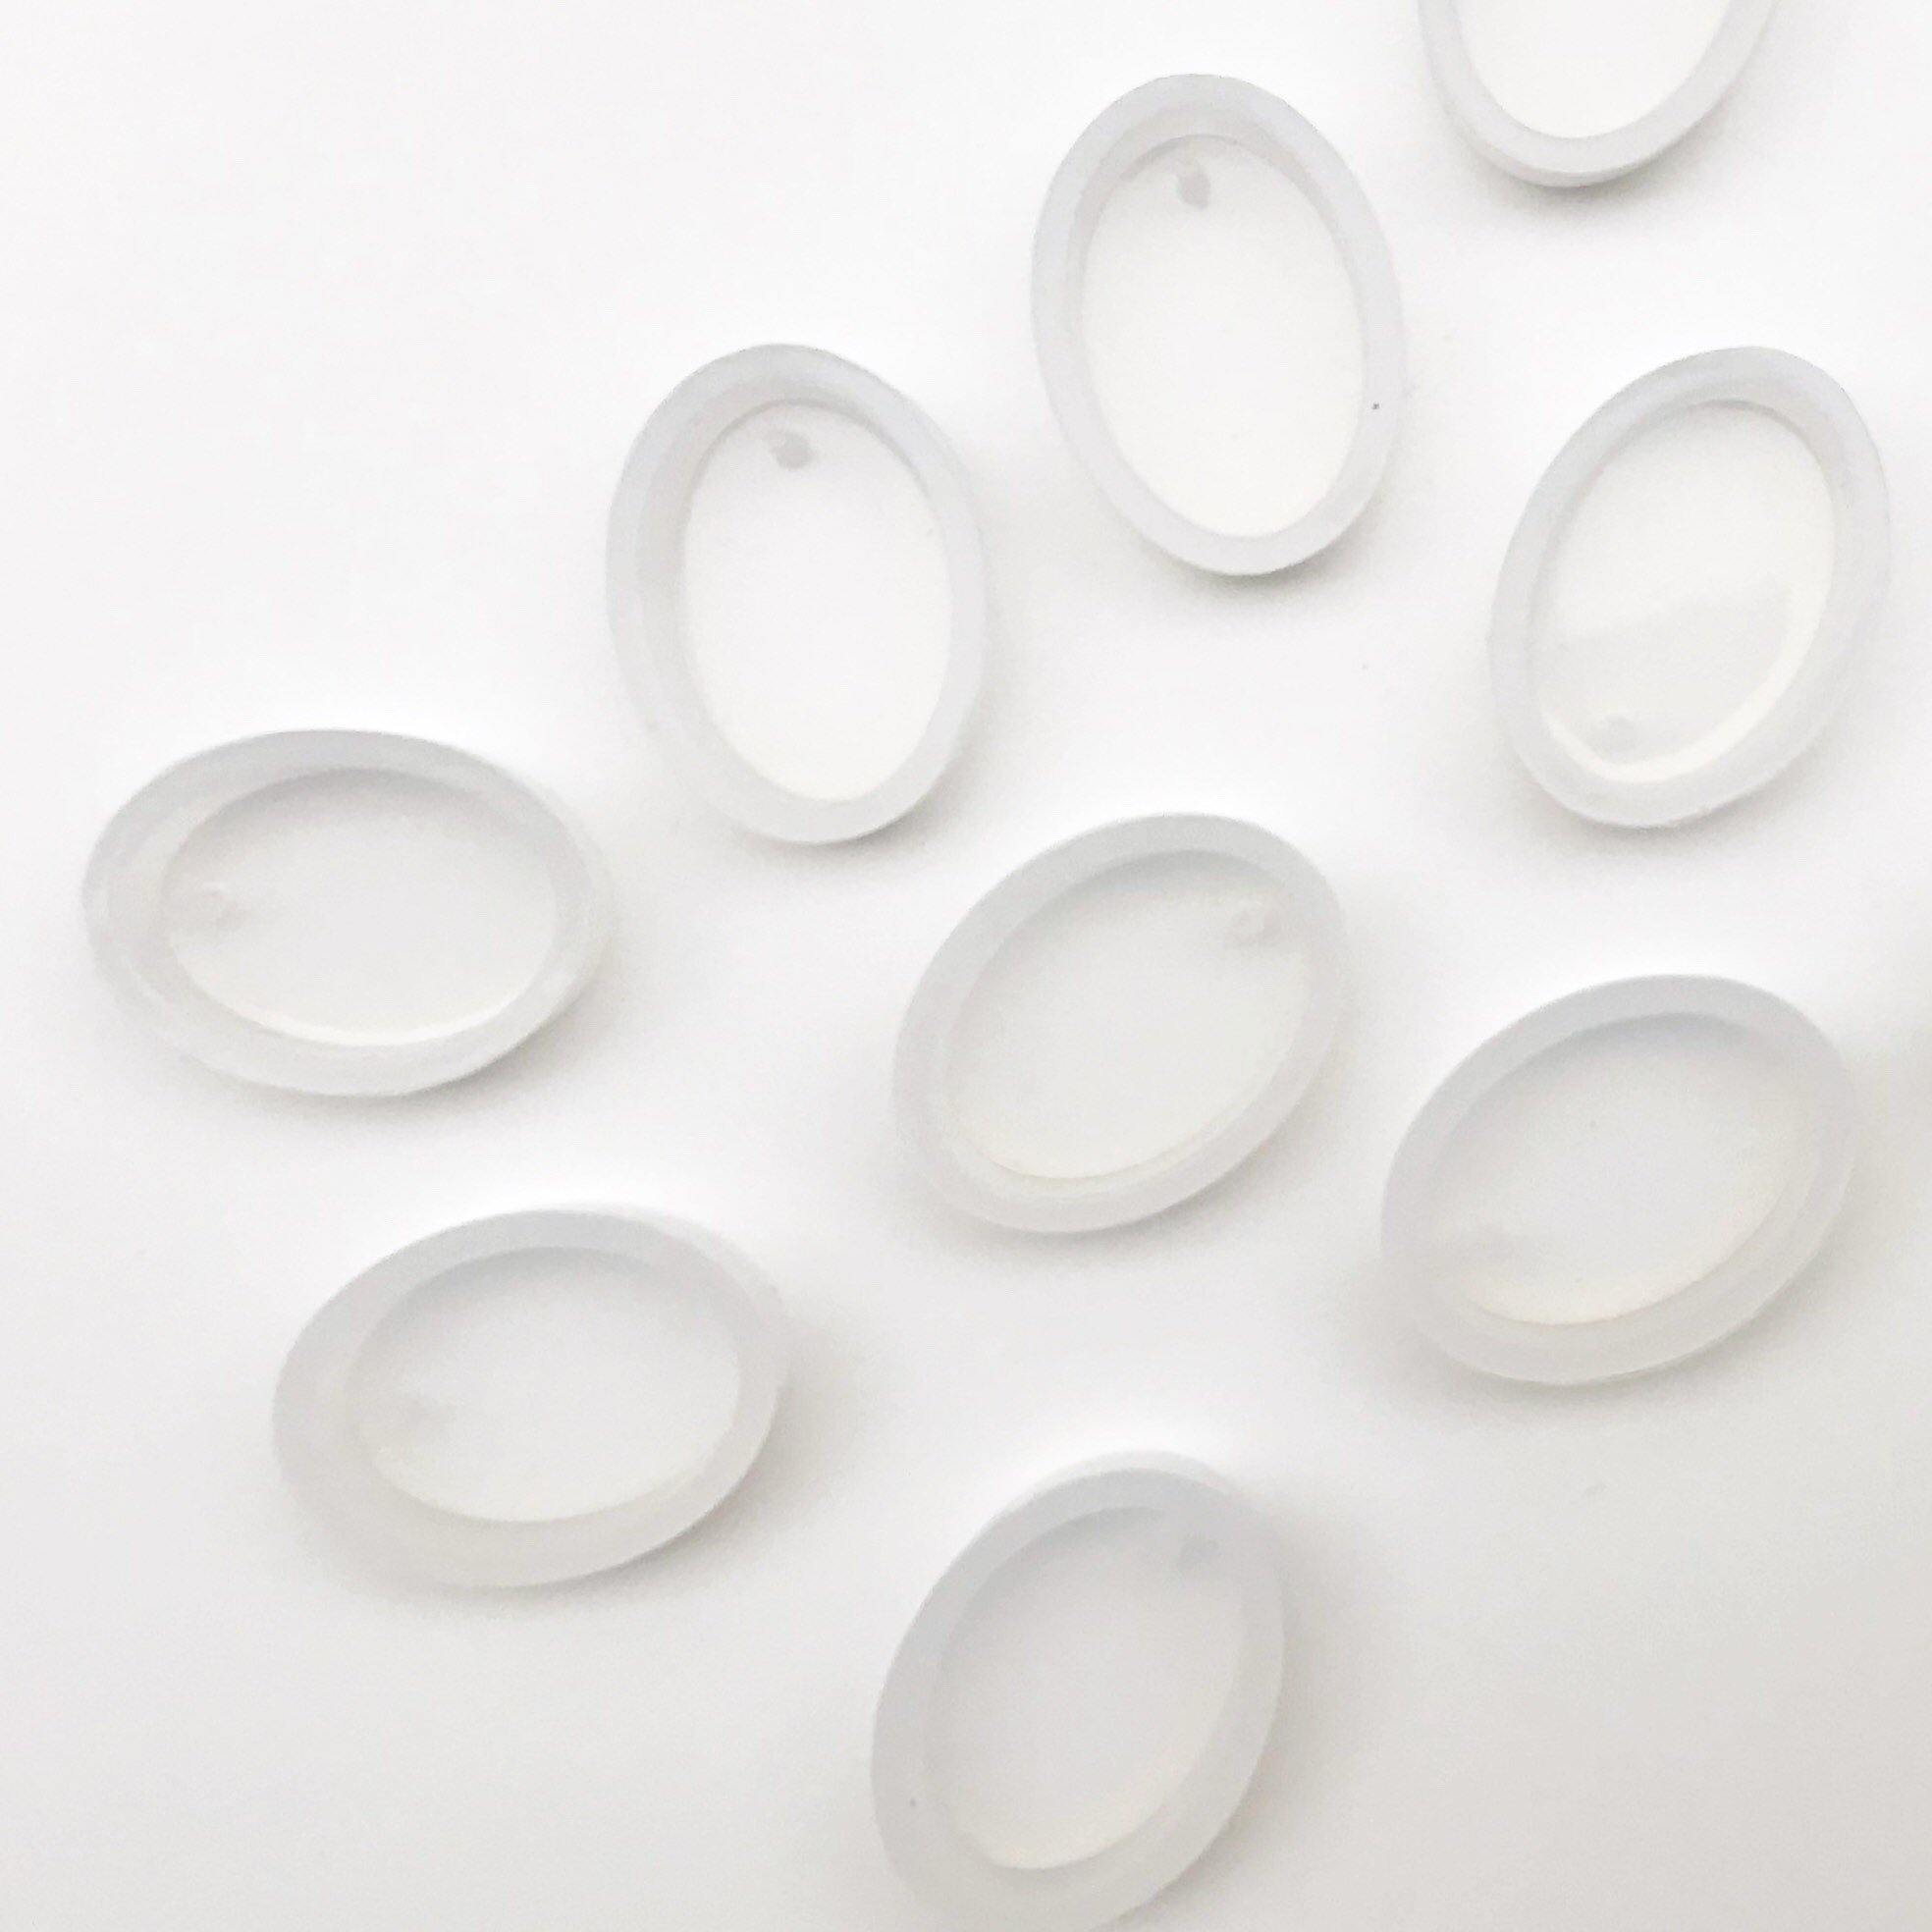 Oval silicone mould (4 pieces) - Poethan